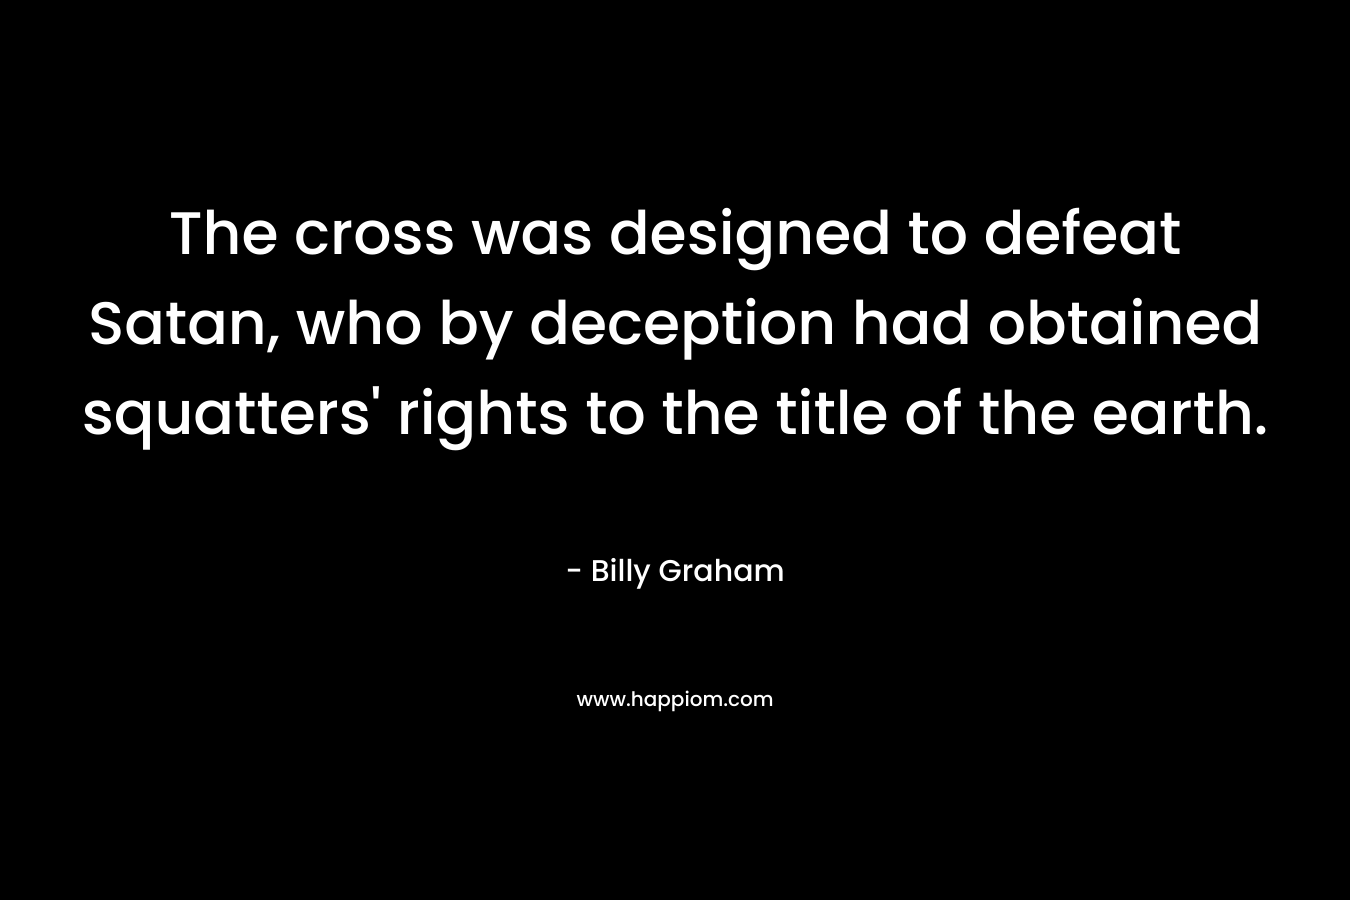 The cross was designed to defeat Satan, who by deception had obtained squatters' rights to the title of the earth.